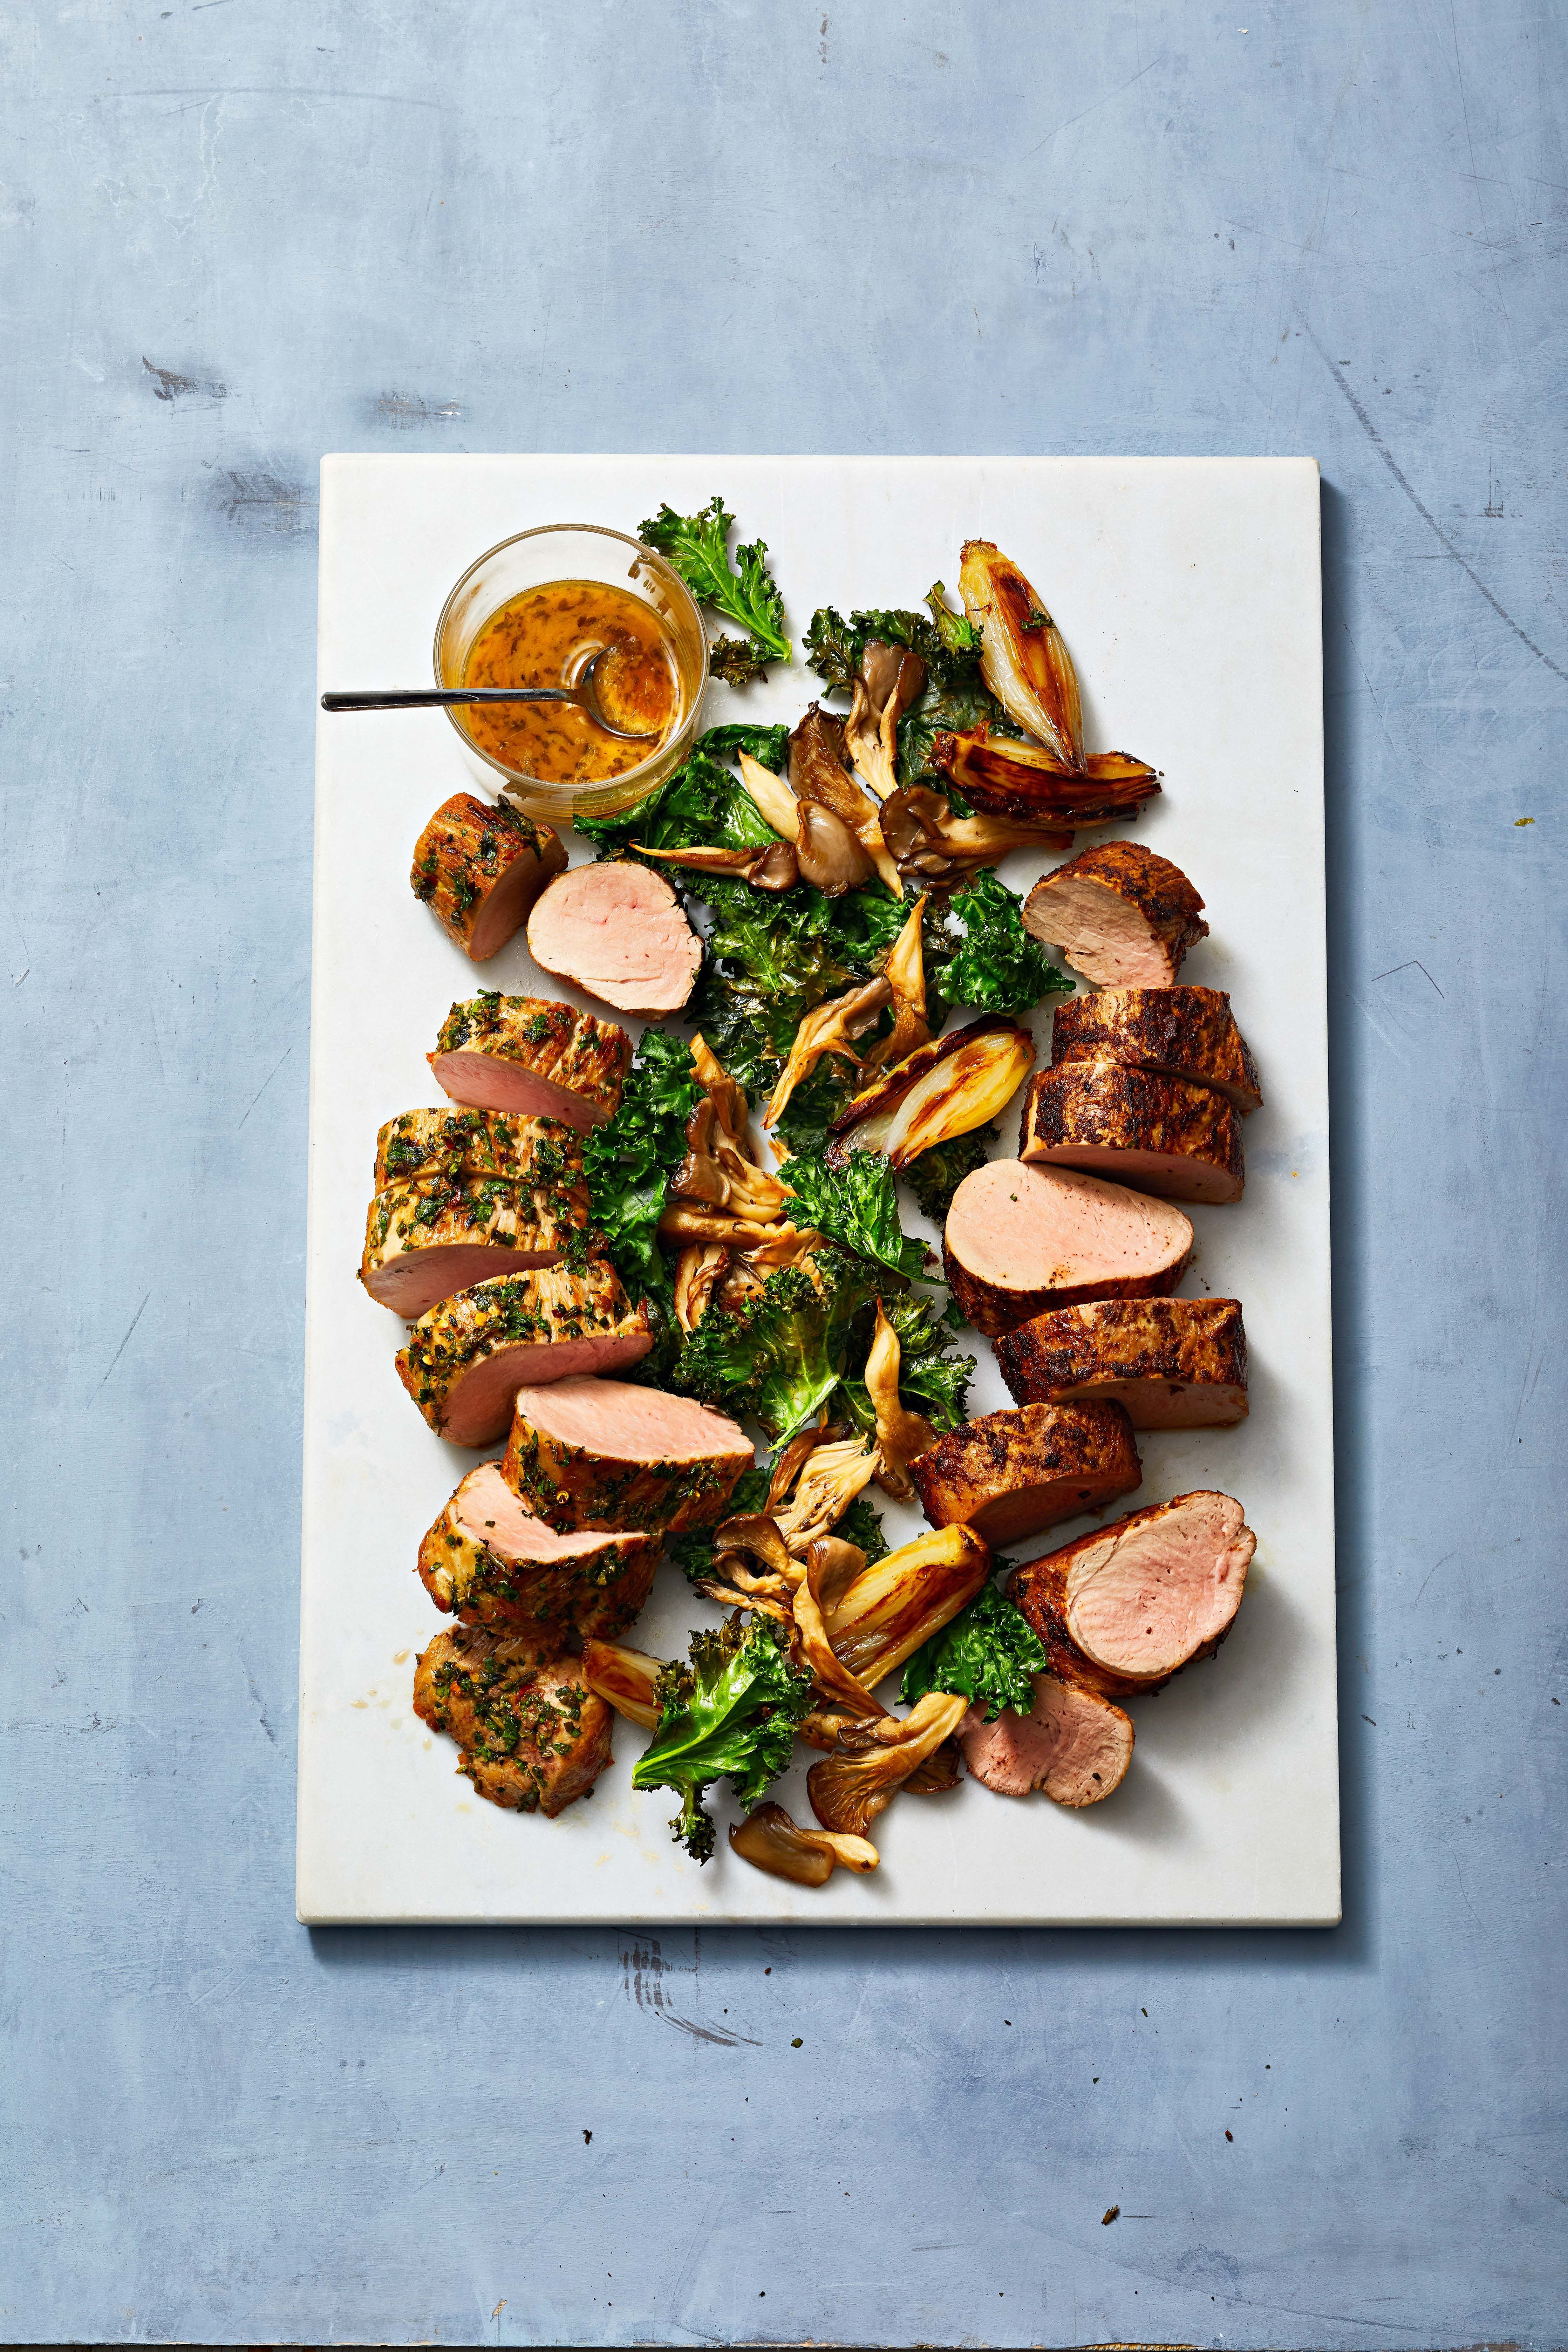 Best Mustard-and-Spice-Rubbed Pork Tenderloin Recipe - How To Make